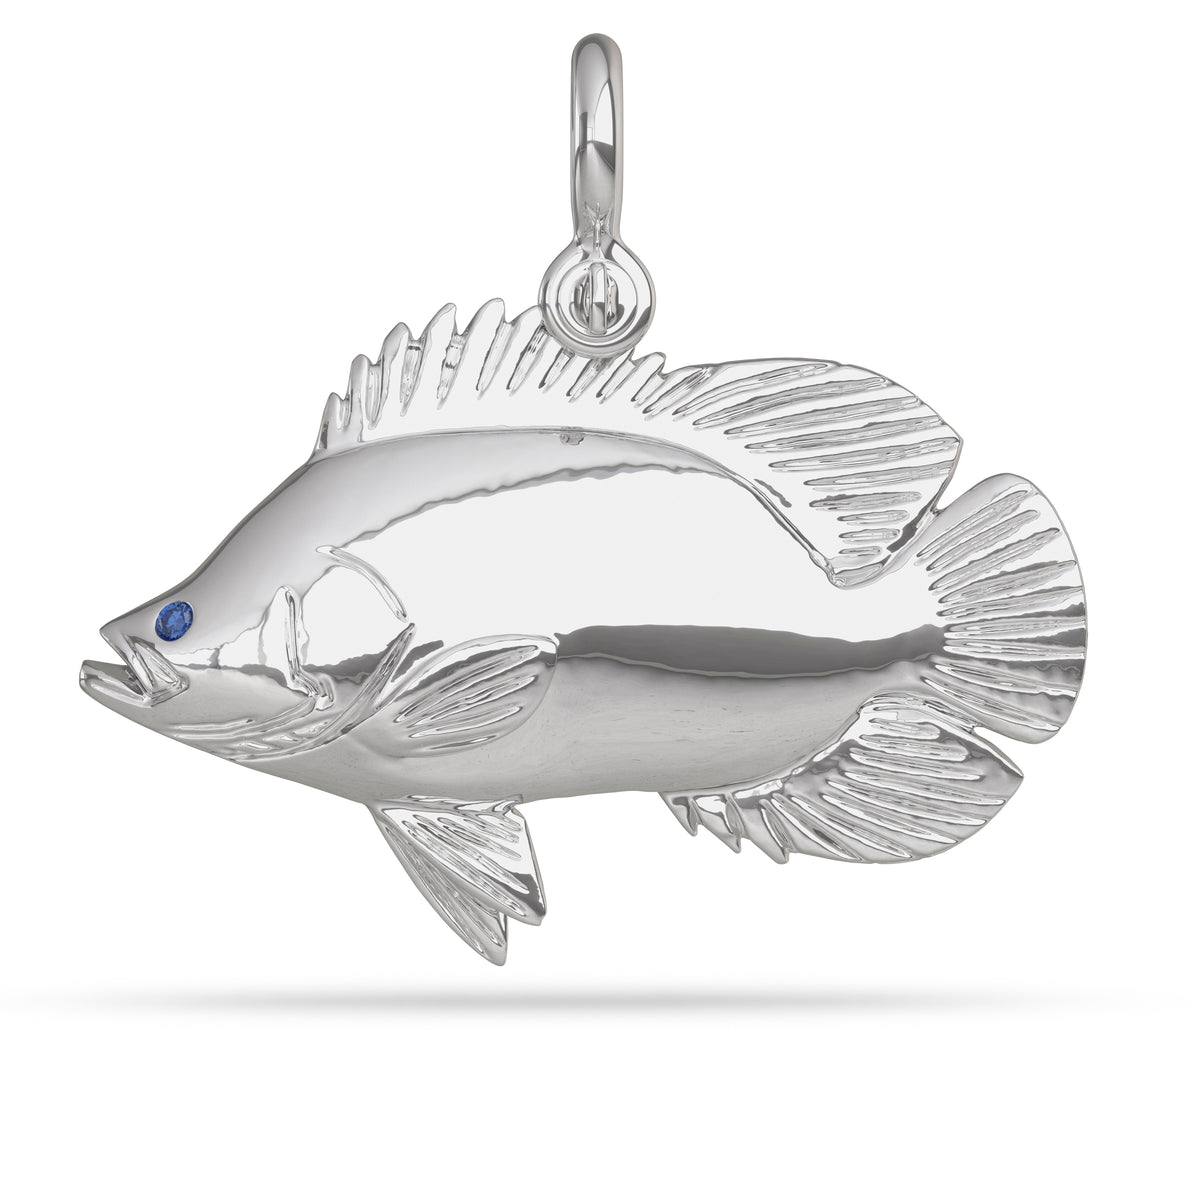 Sterling Silver Atlantic Tripletail Pendant High Polished Mirror Finish With Blue Sapphire Eye with A Mariner Shackle Bail Custom Designed By Nautical Treasure Jewelry In The Florida Keys Lobotes Surinamensis